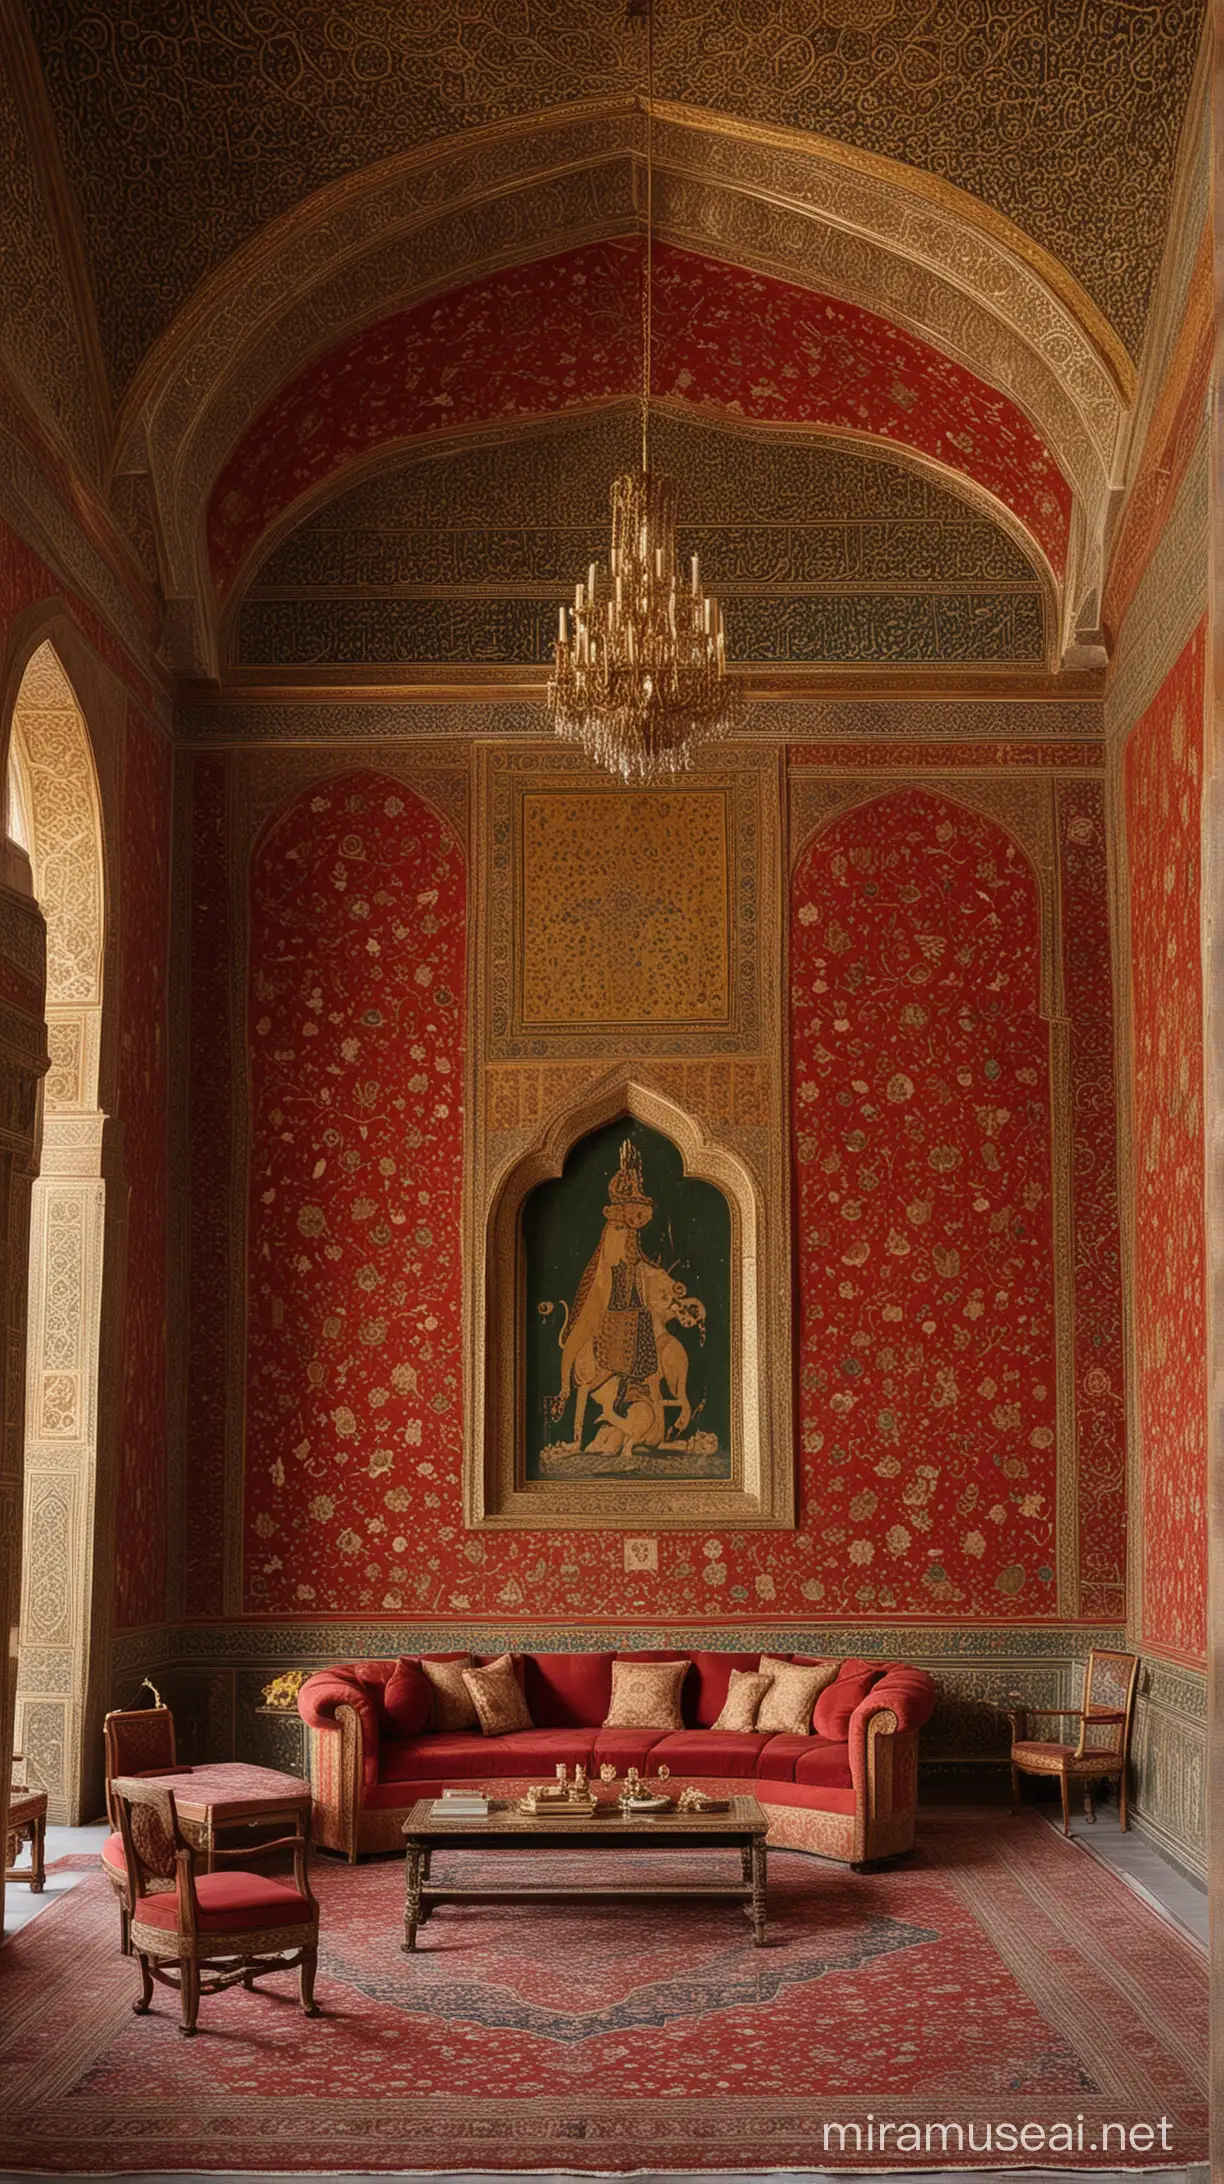 In one of the opulent and splendid chambers of the Persian palace, there stands a doctor before an intricately adorned throne. The room is adorned with rich red and golden furnishings, and the doctor, holding a medical tome, stands solemnly beside the throne. Surrounding him are other attendants and advisors of the palace, some engaged in conversation or attending to duties. Adorning the walls are lion figurines, symbolizing the might of the Persian Empire. Illumination is provided by magnificent chandeliers, casting a regal glow throughout the room.

